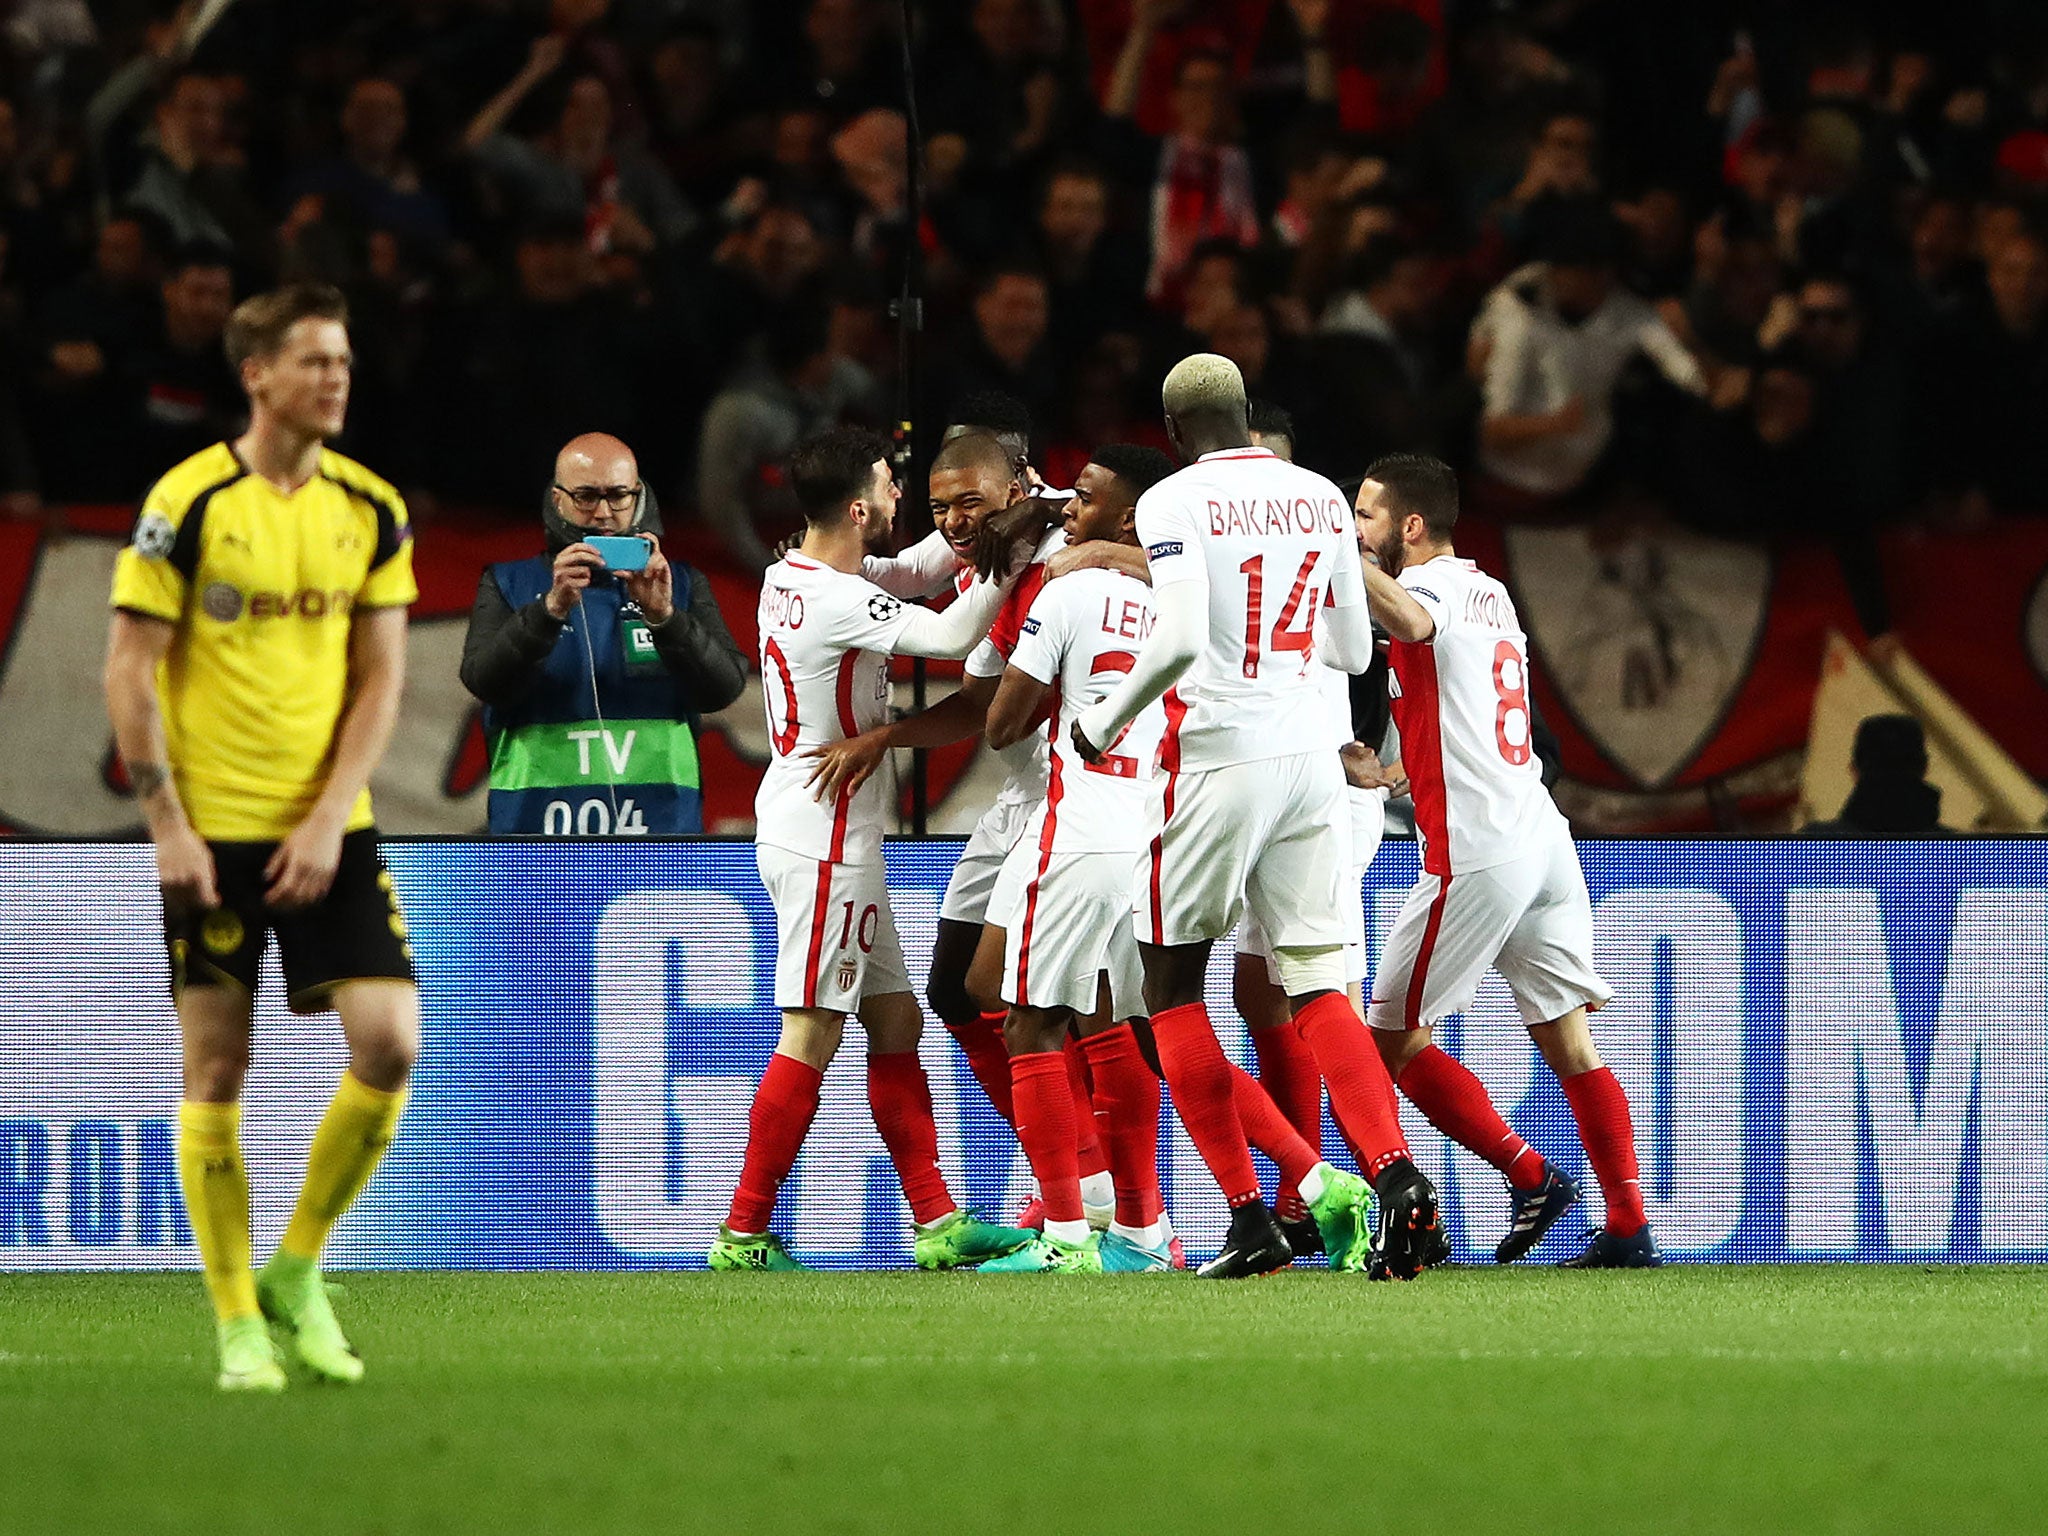 Kylian Mbappe scored after just three minutes to put Monaco ahead